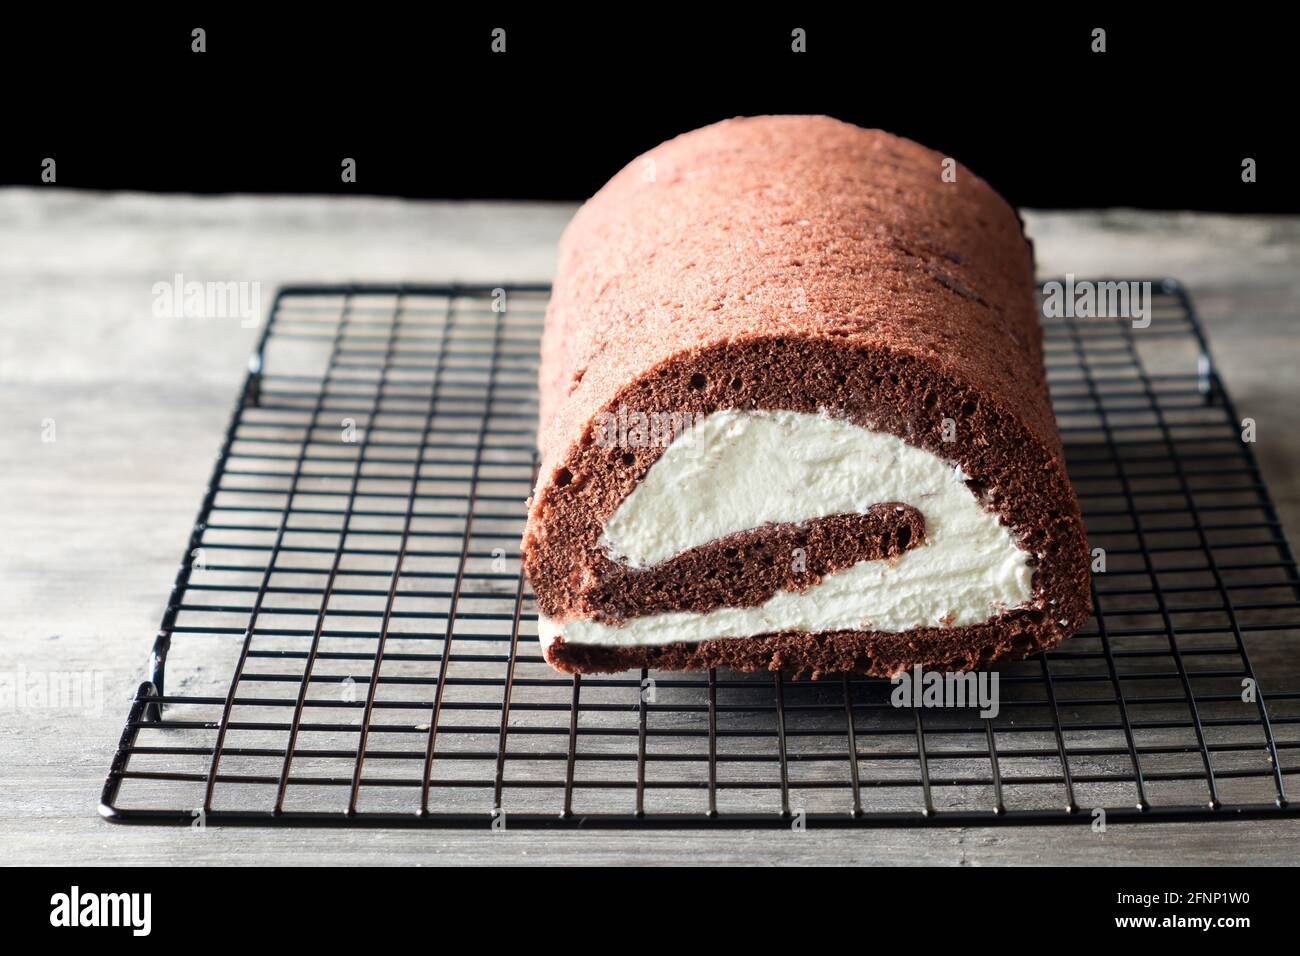 A fresh home made gluten free chocolate Swiss Roll, filled with a mascarpone whipped cream filling has been rolled and sits on a cooling rack Stock Photo